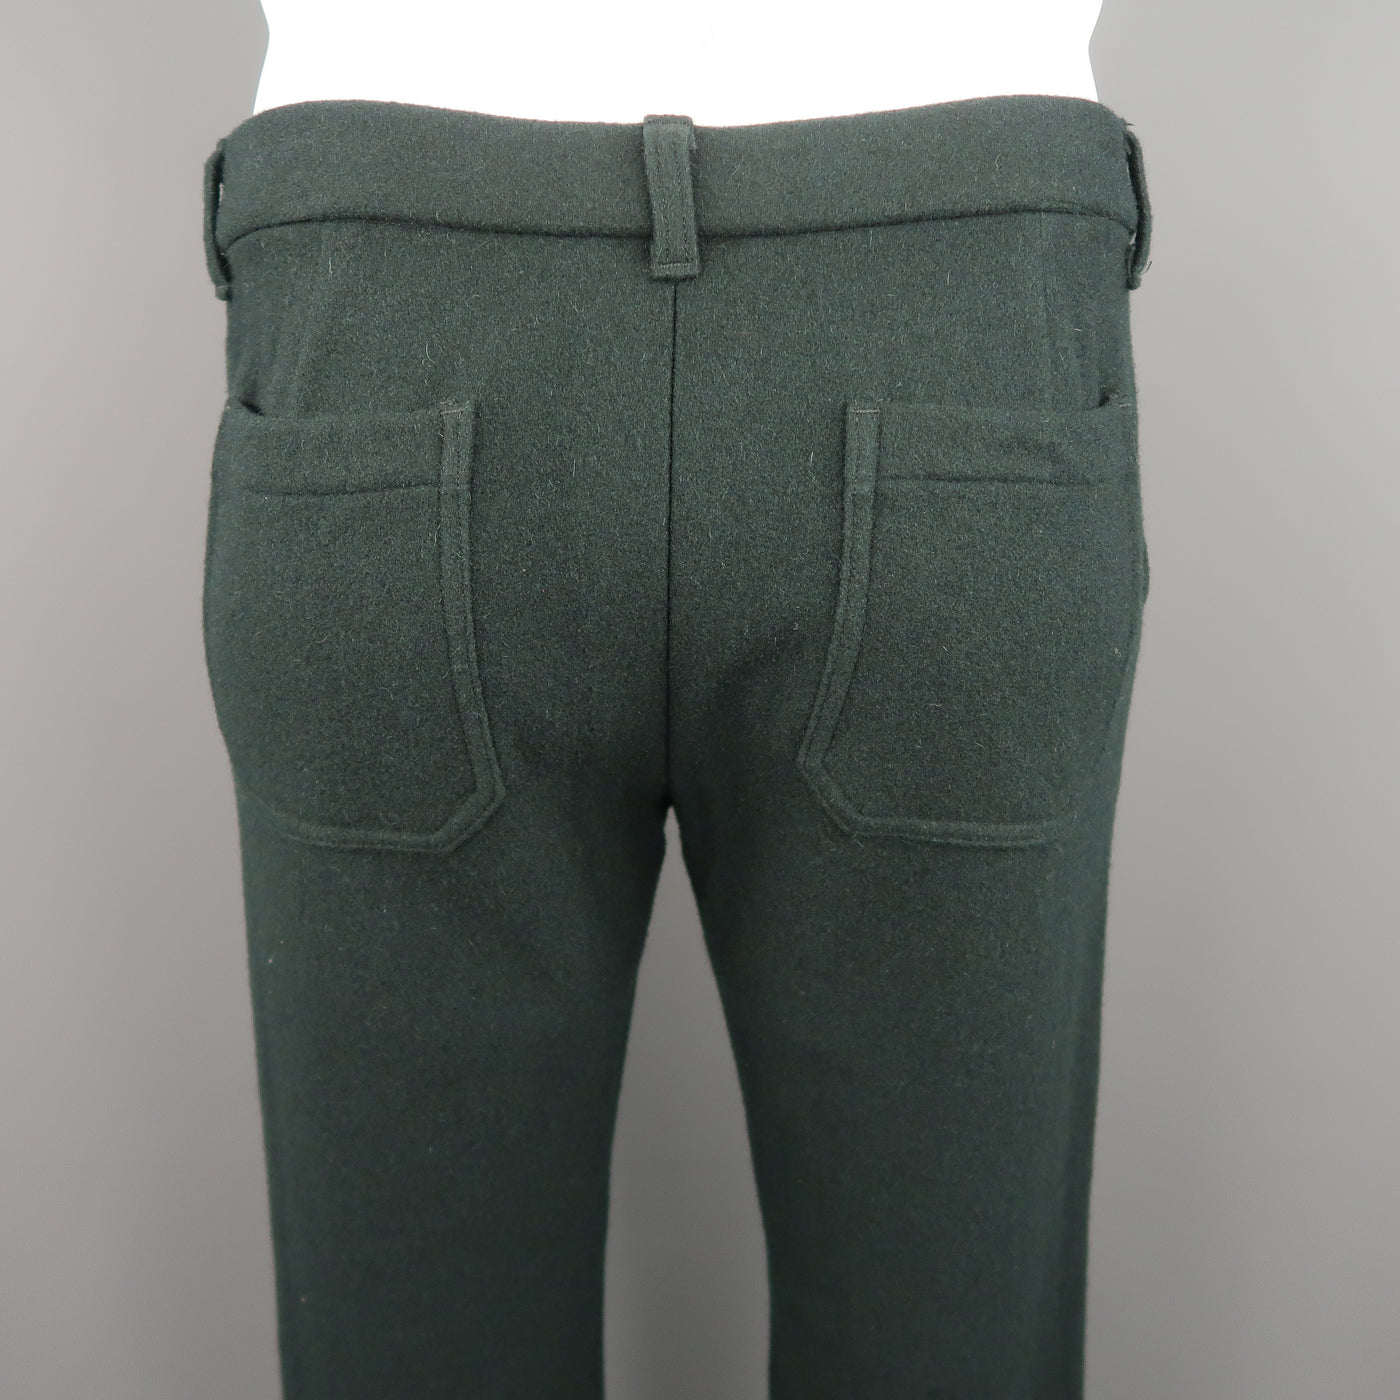 STILL by HAND Size 34 x 30 / 3 JP  Forest Green Solid Wool Blend Casual Pants